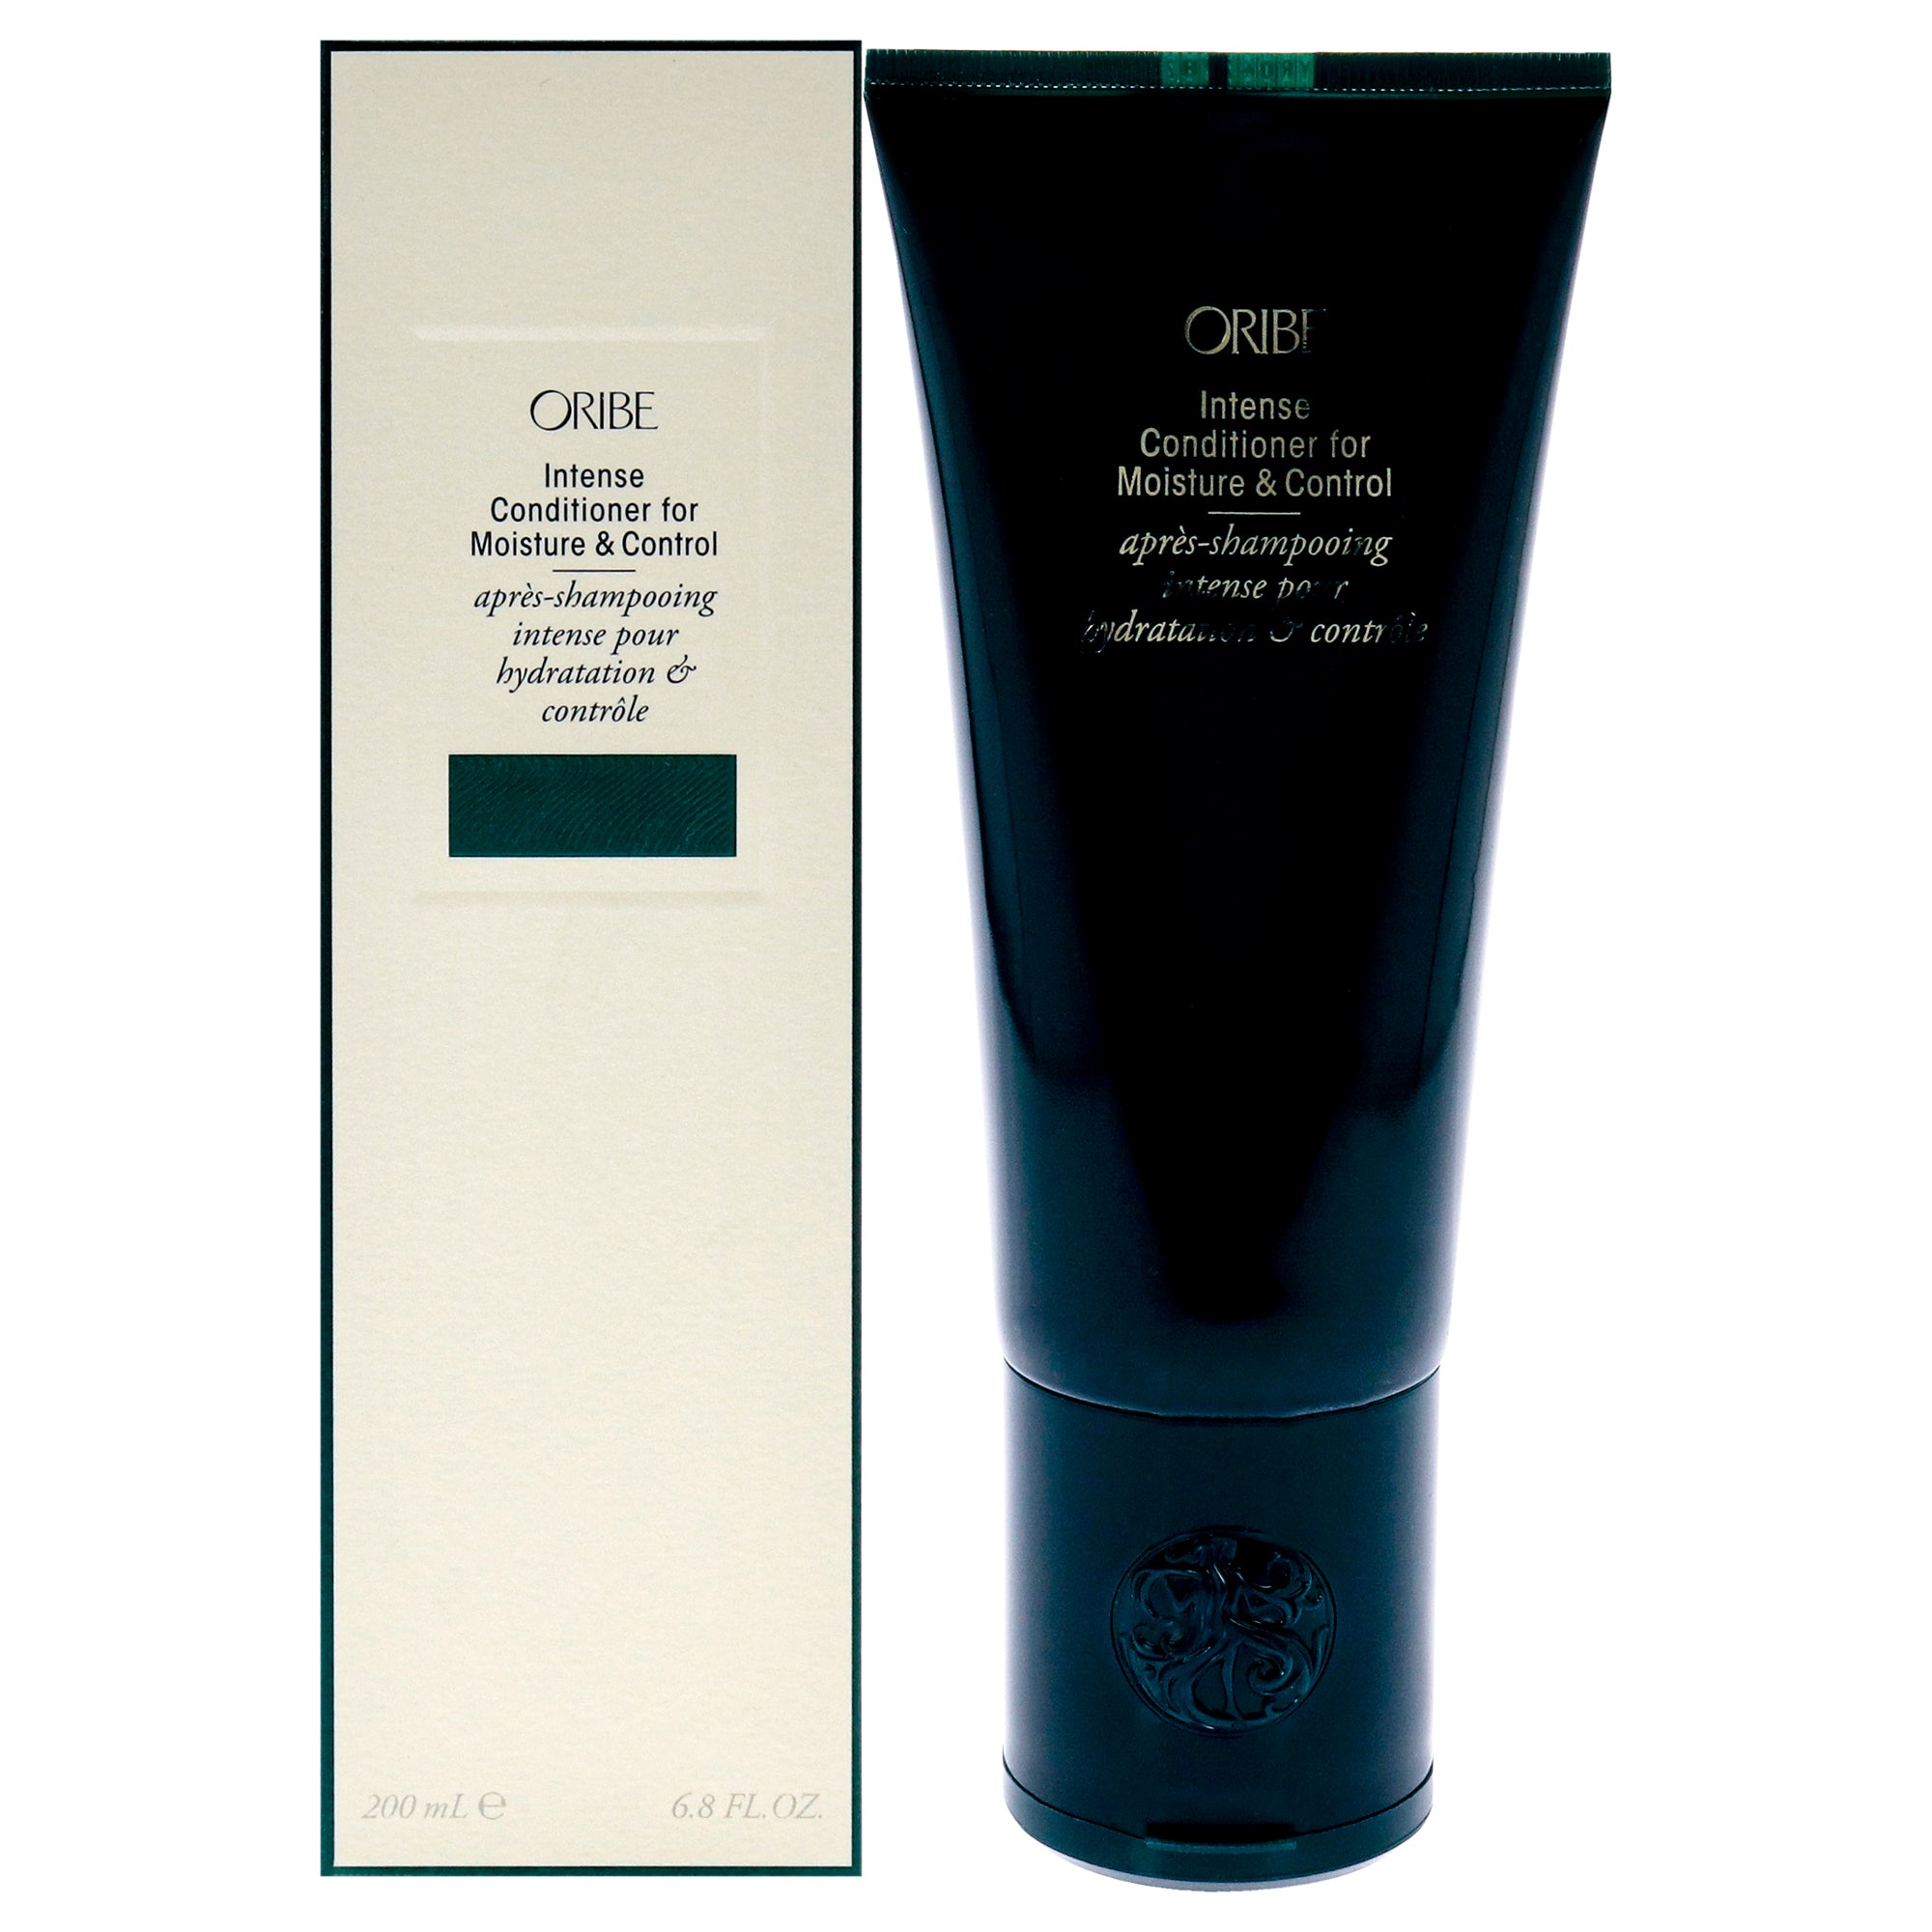 Intense Conditioner for Moisture Control by Oribe for Unisex 6.8 oz Conditioner